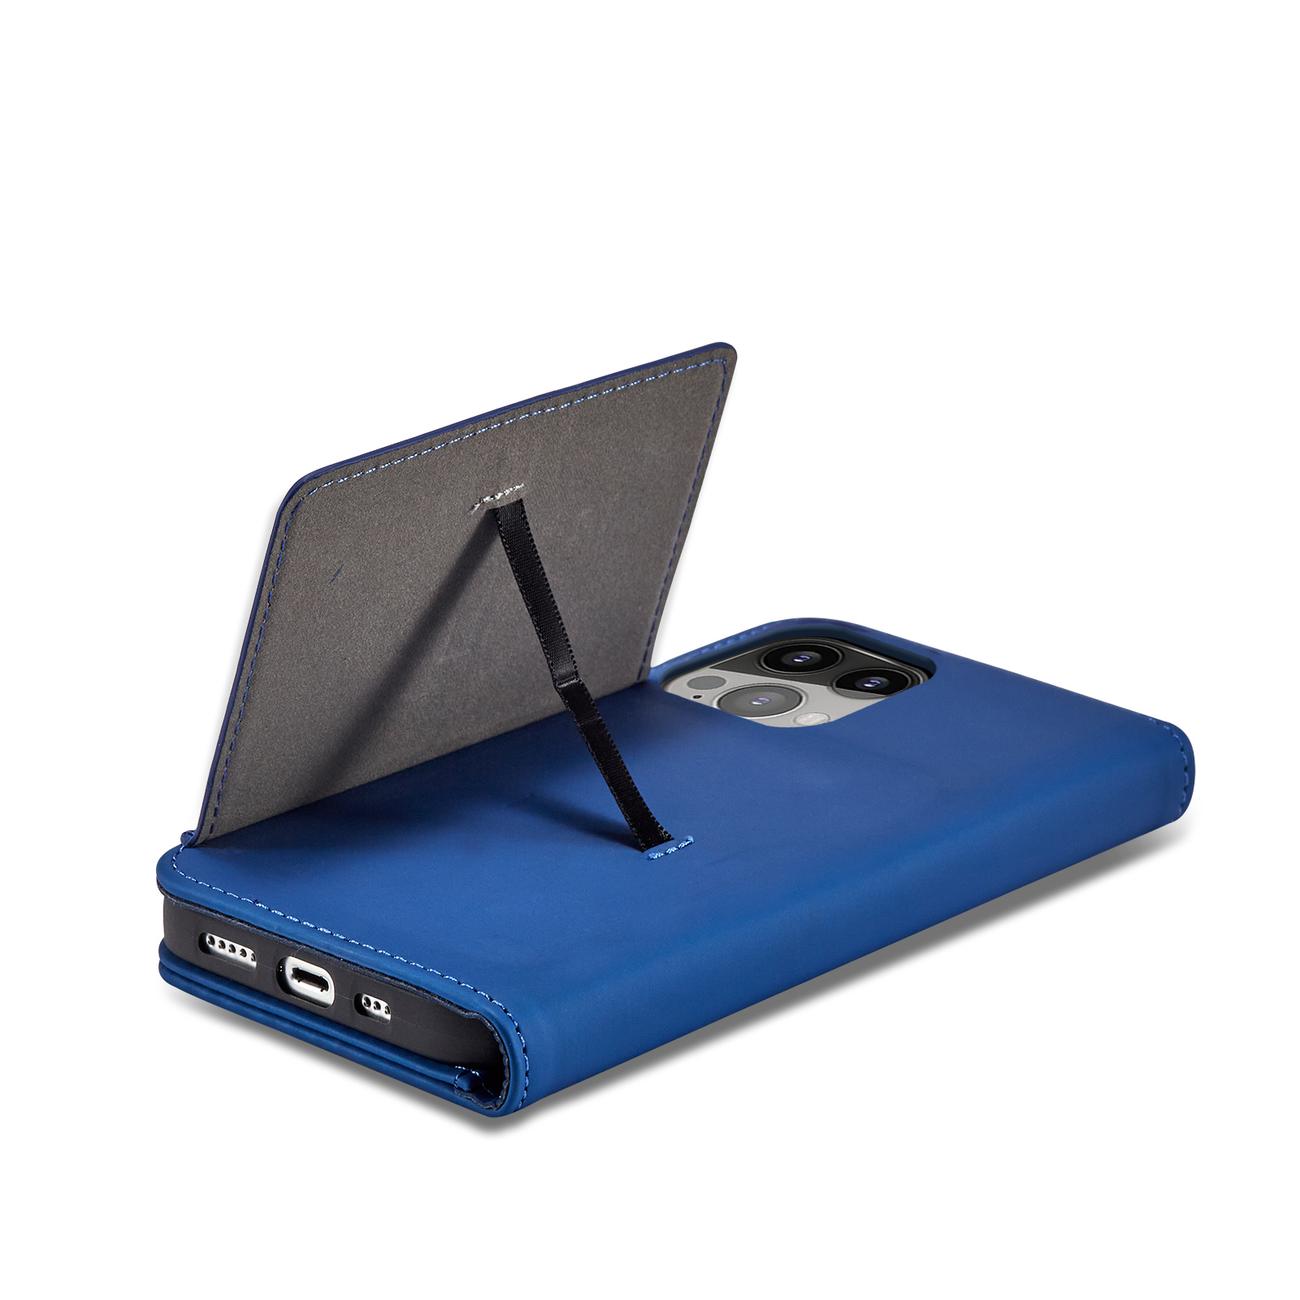 Magnet Card Case for iPhone 13 mini cover card wallet card stand blue